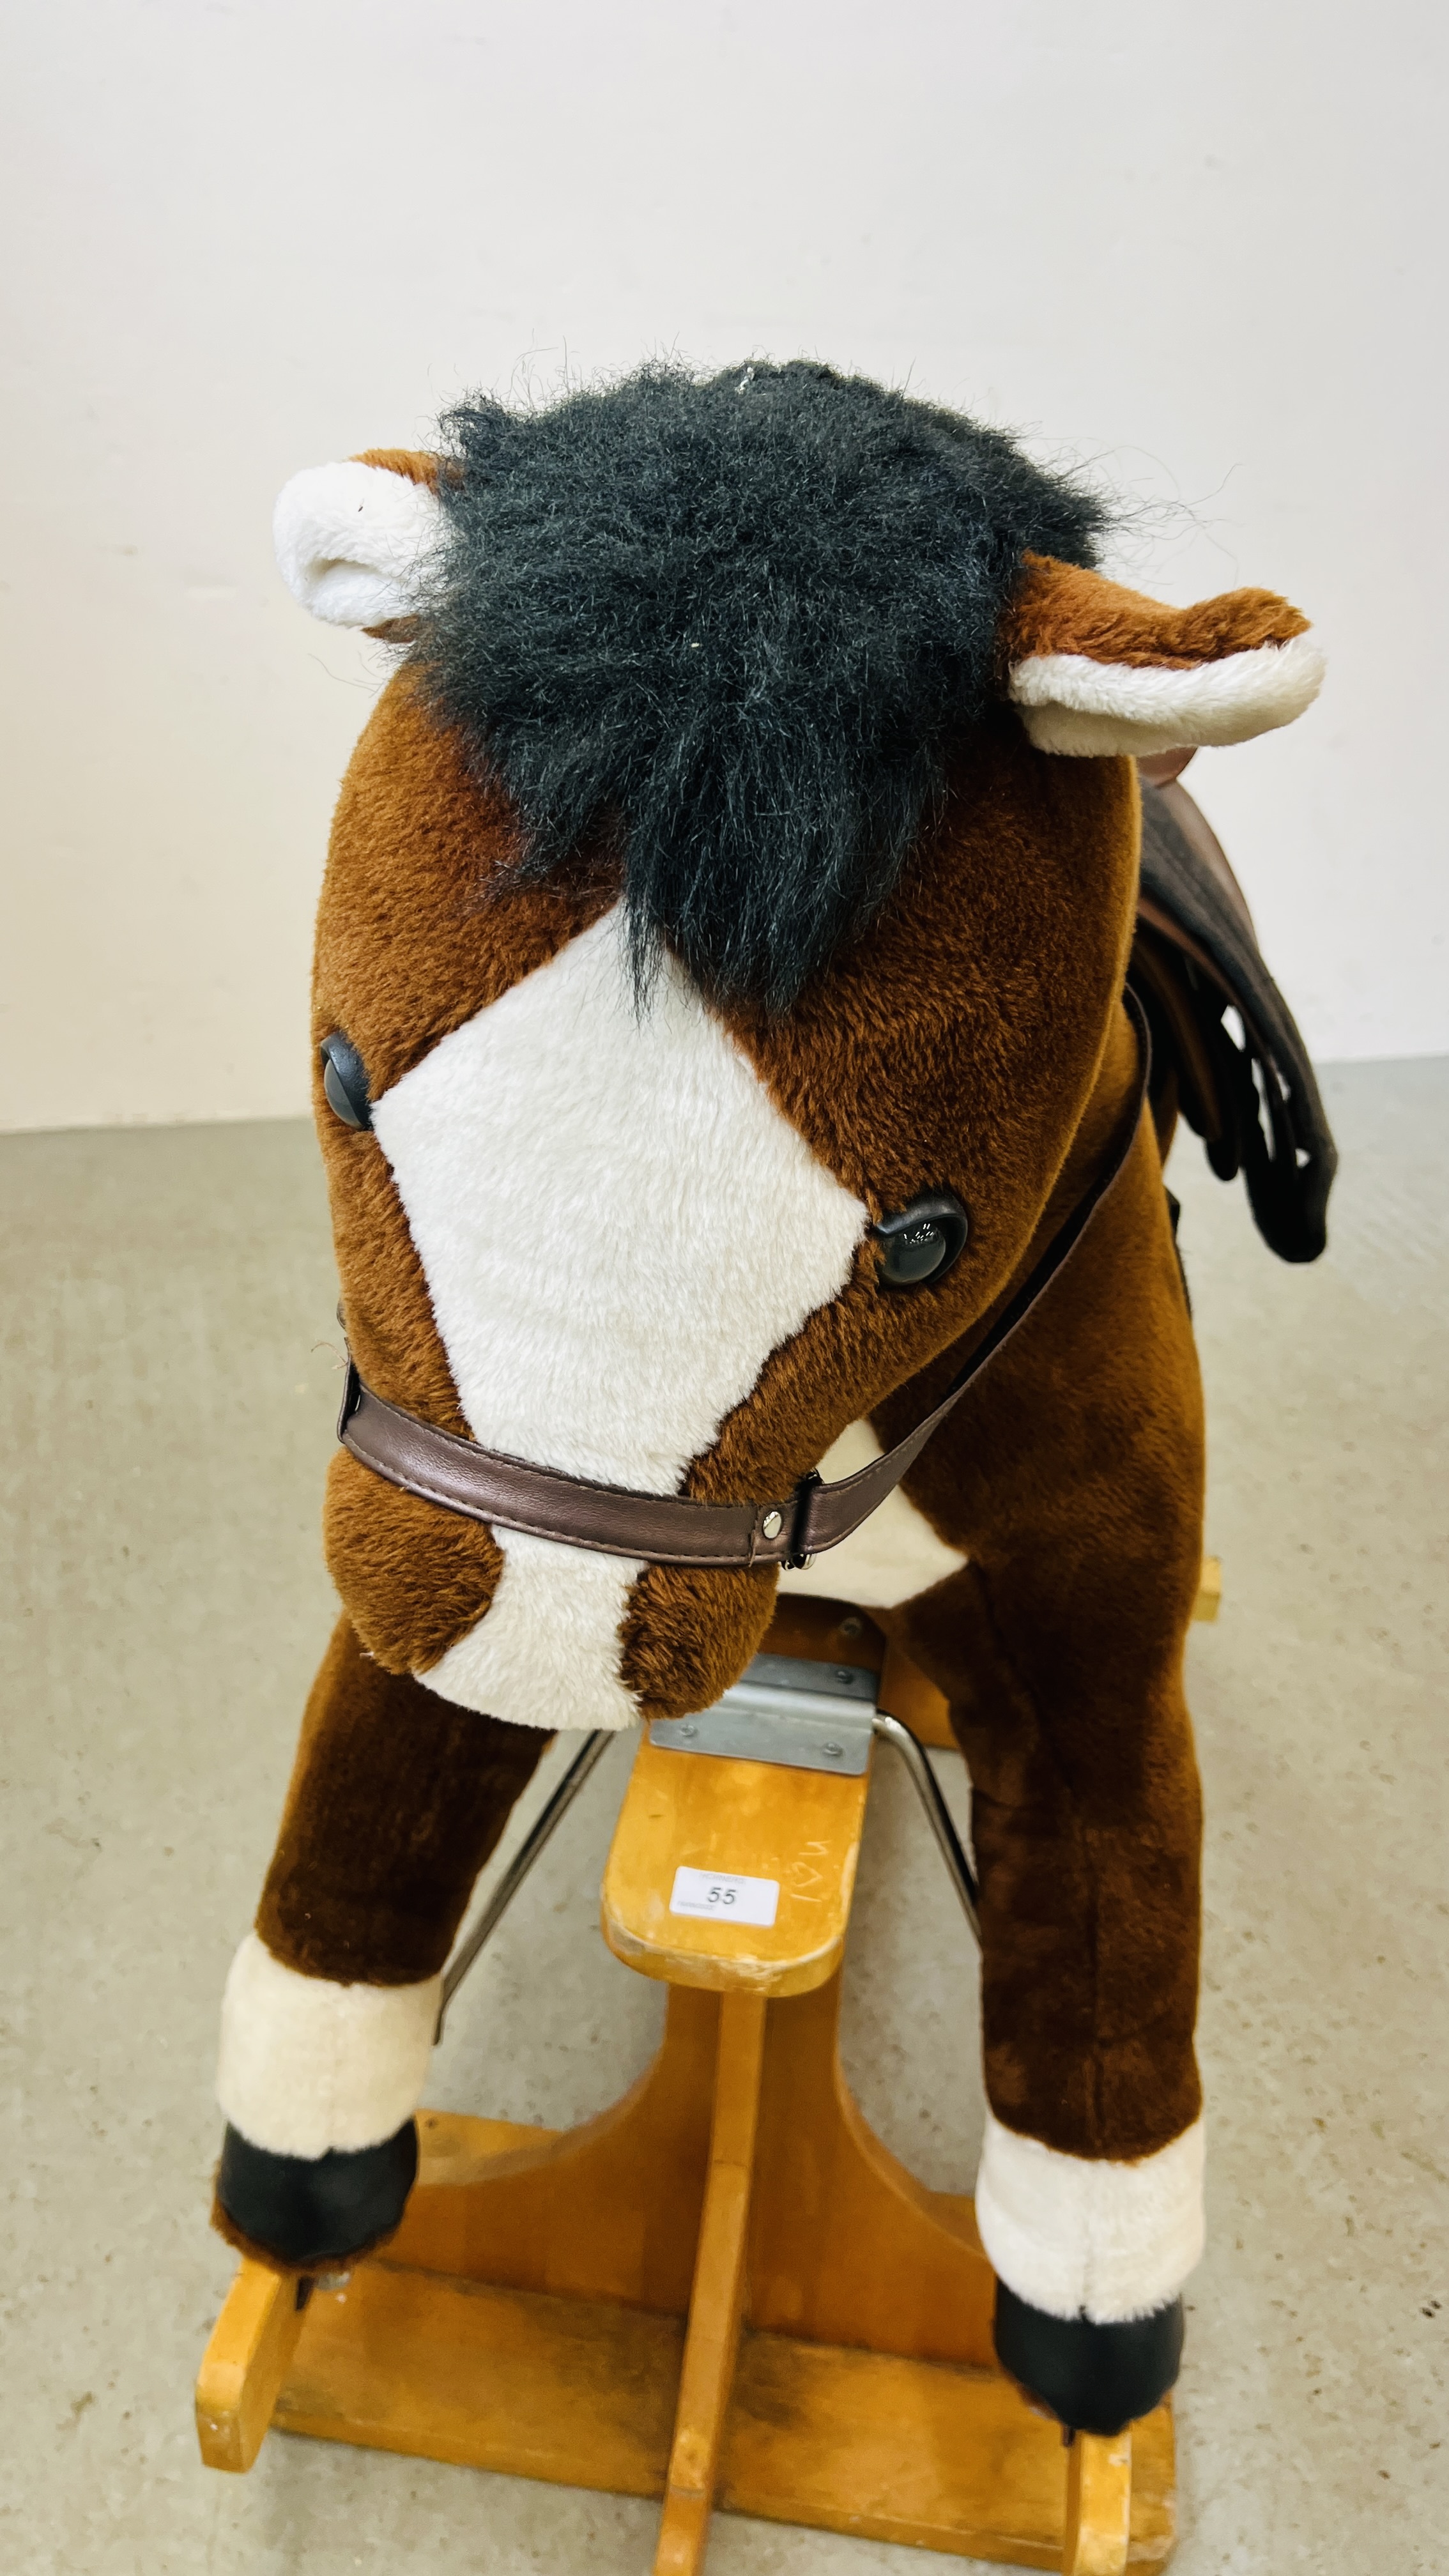 A MODERN CHILDS ROCKING HORSE WITH LEATHER SADLE - Image 6 of 9